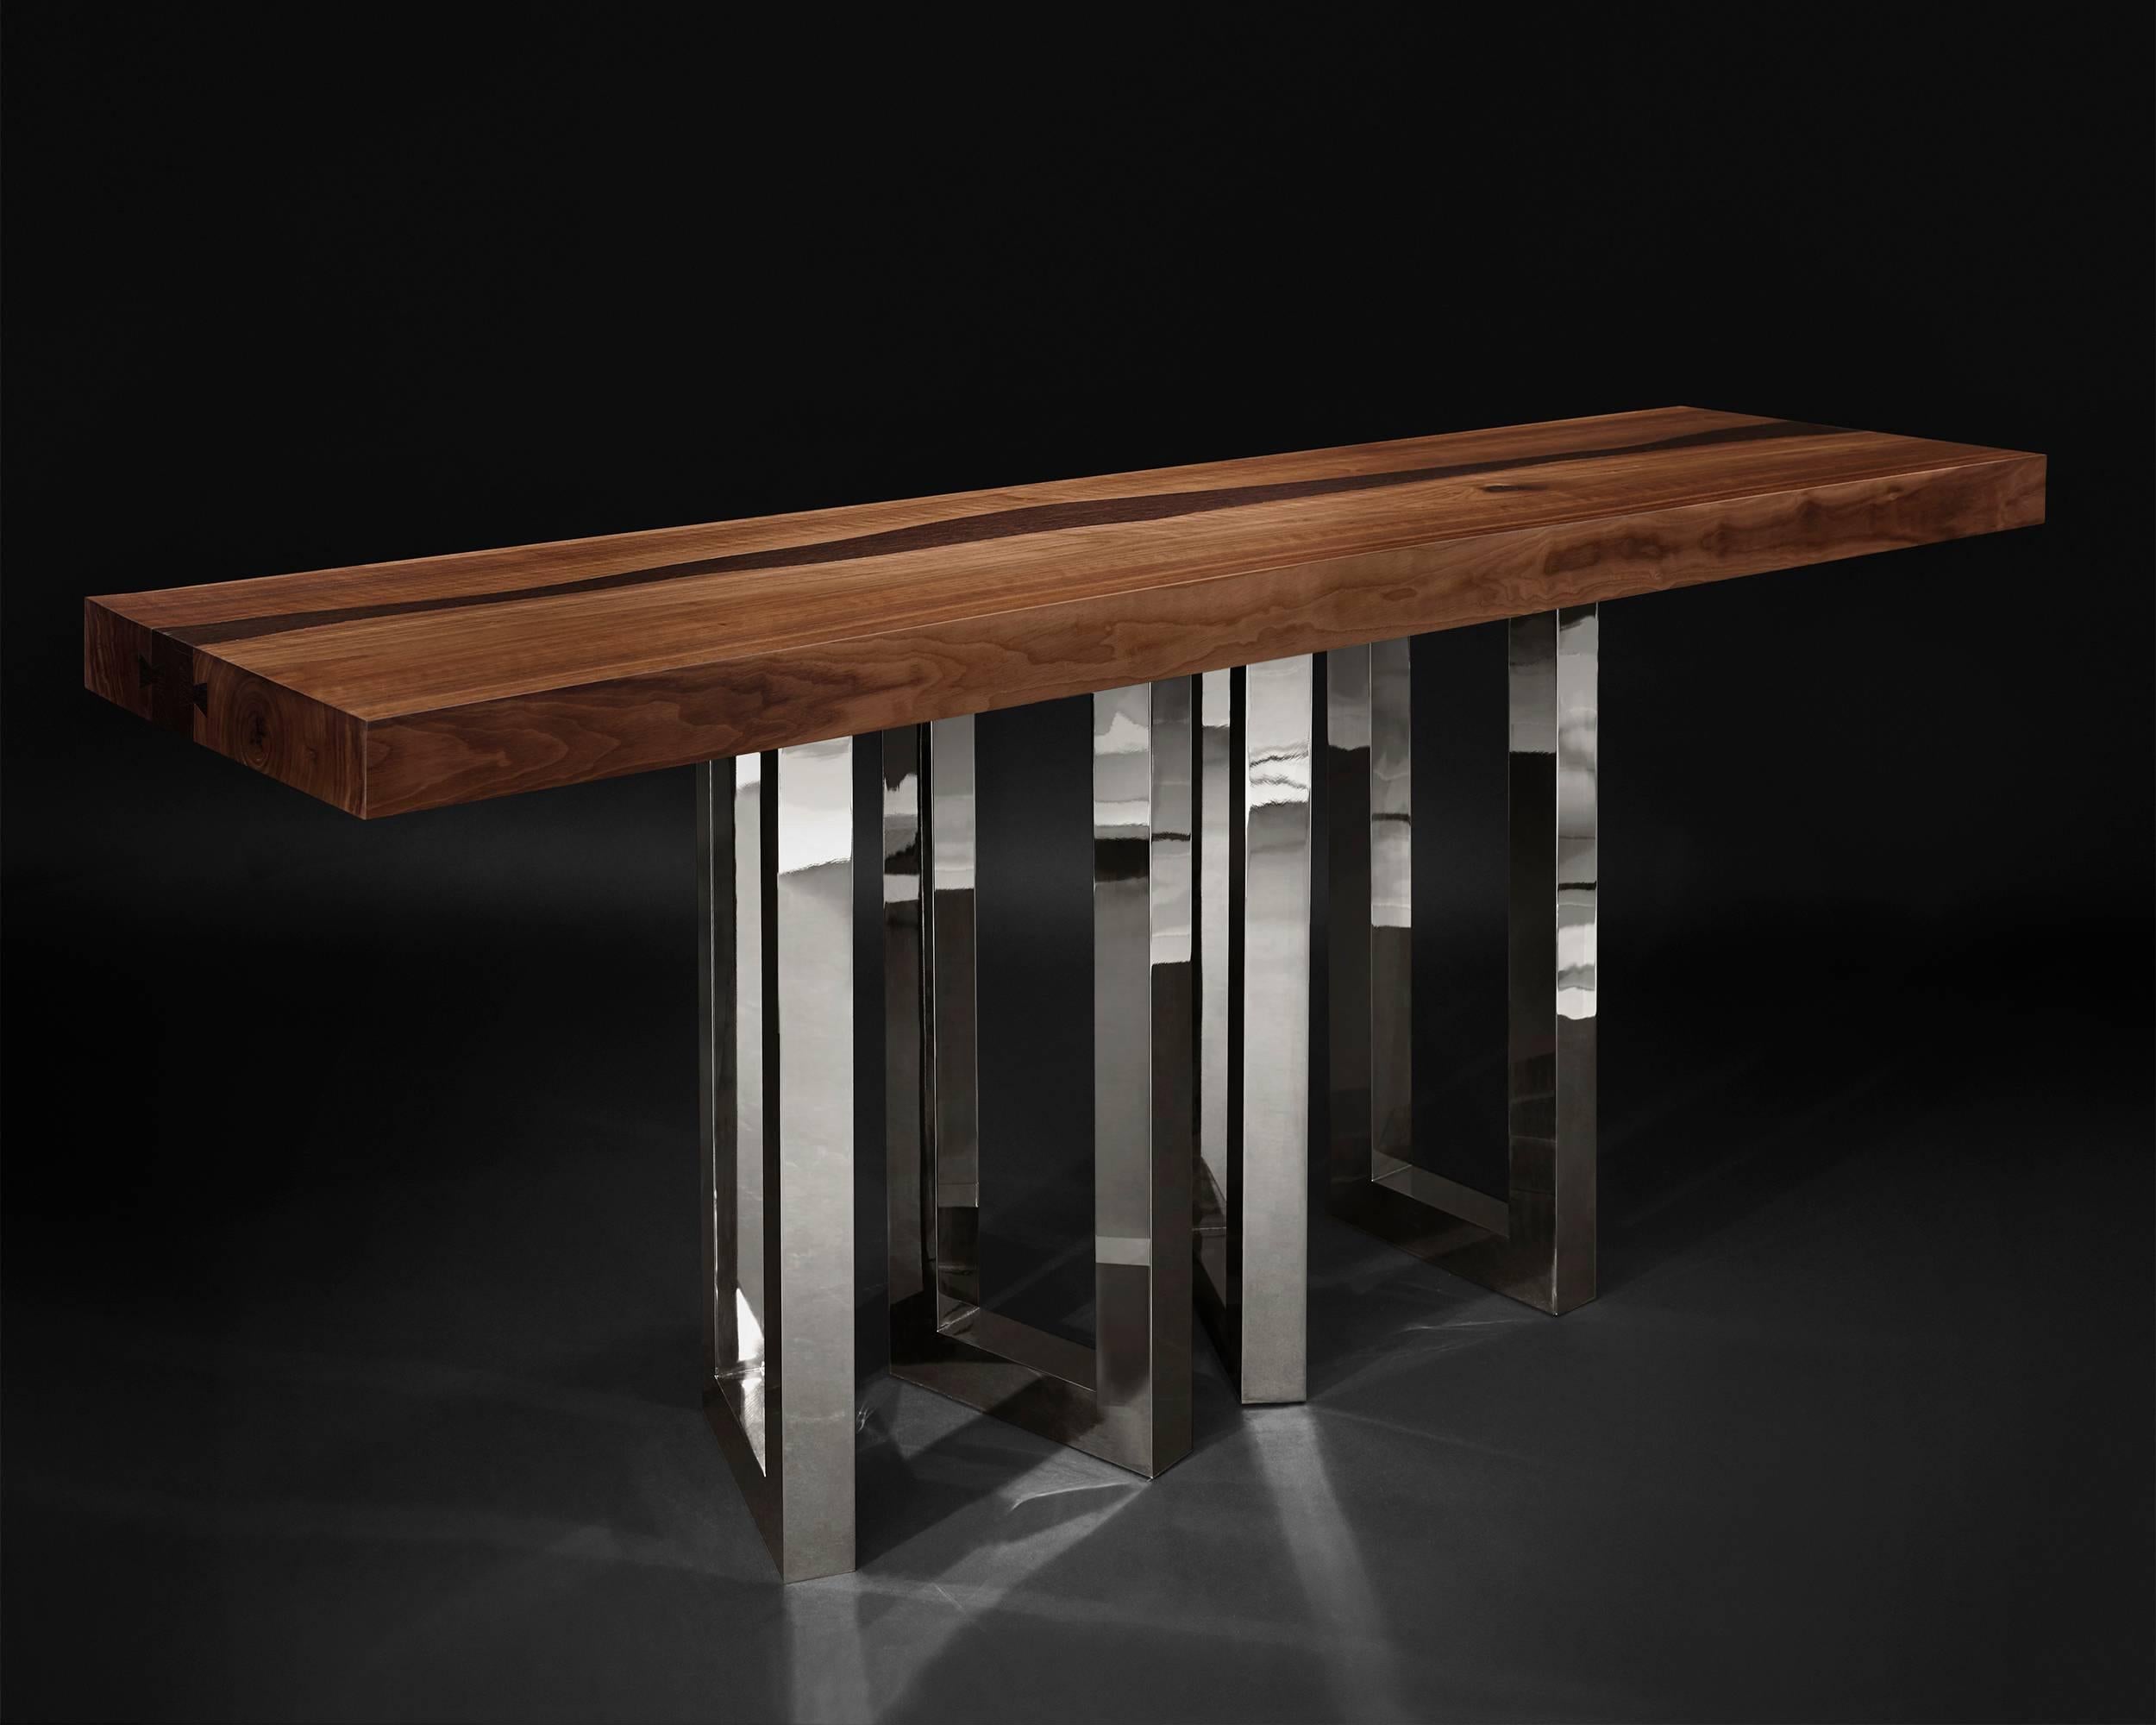 A solid block of walnut held up by what seems to be a casually arranged group of glittering legs. A composite of contrasting elements, massive and sophisticated, strong and passionate; Il Pezzo 6 Console is a harmonious and timeless whole.
The